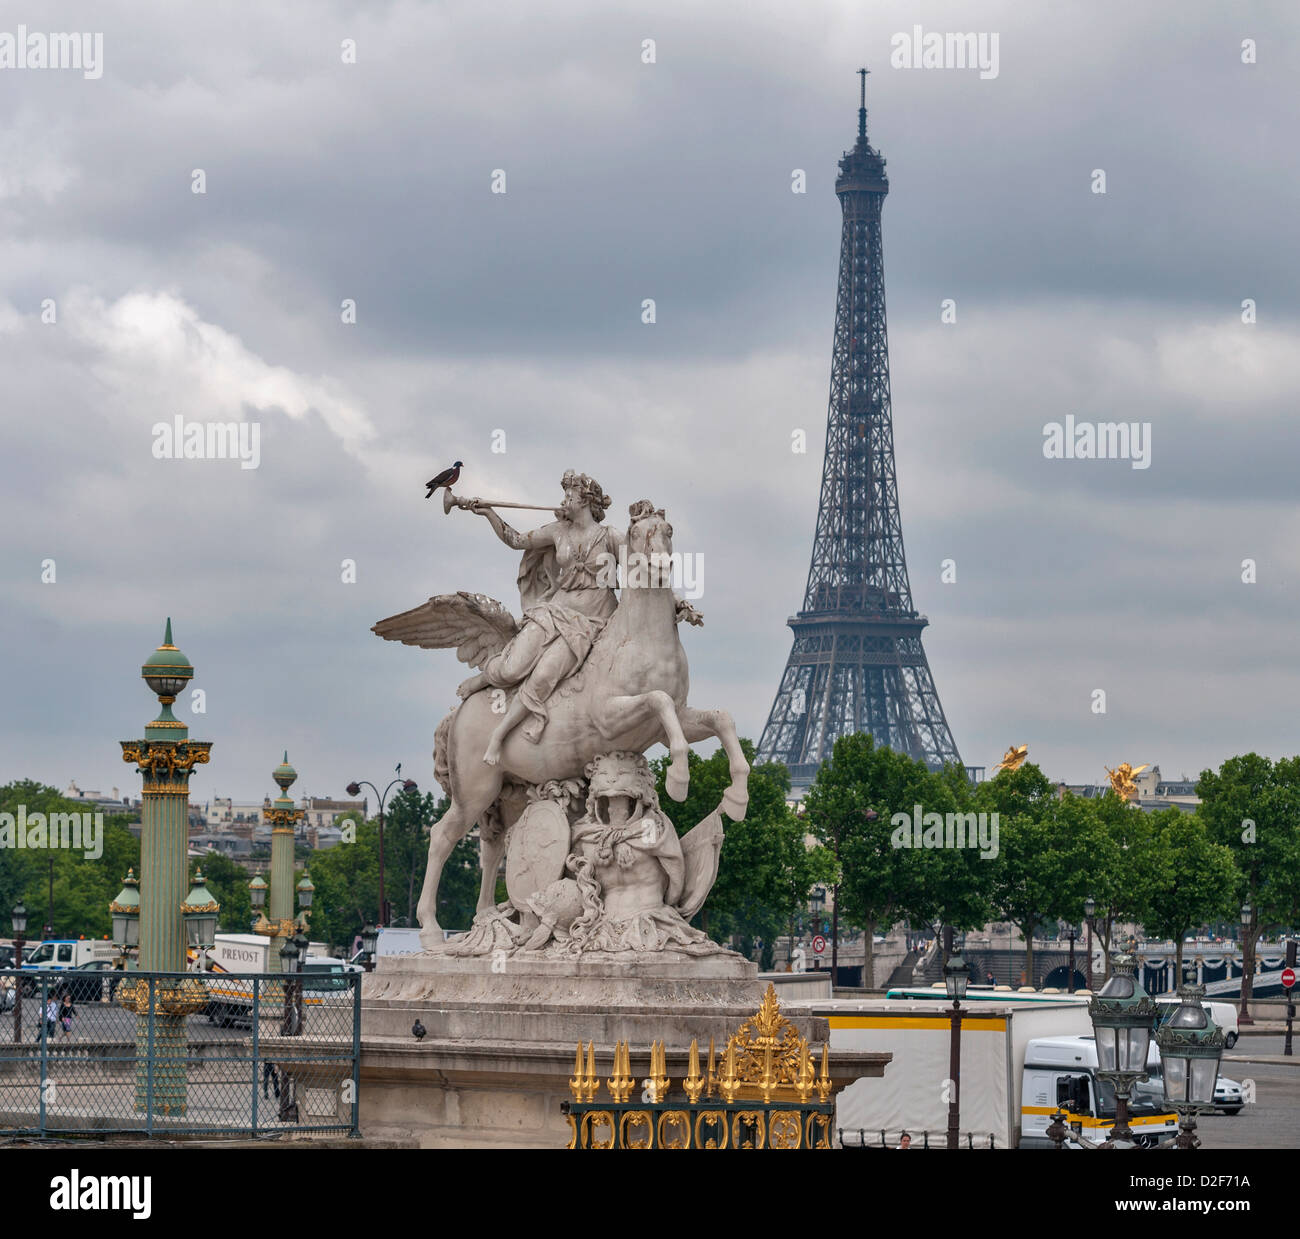 Sculpture, obelisk and Eiffel Tower  from the Jardin des Tuileries in Paris,France Stock Photo